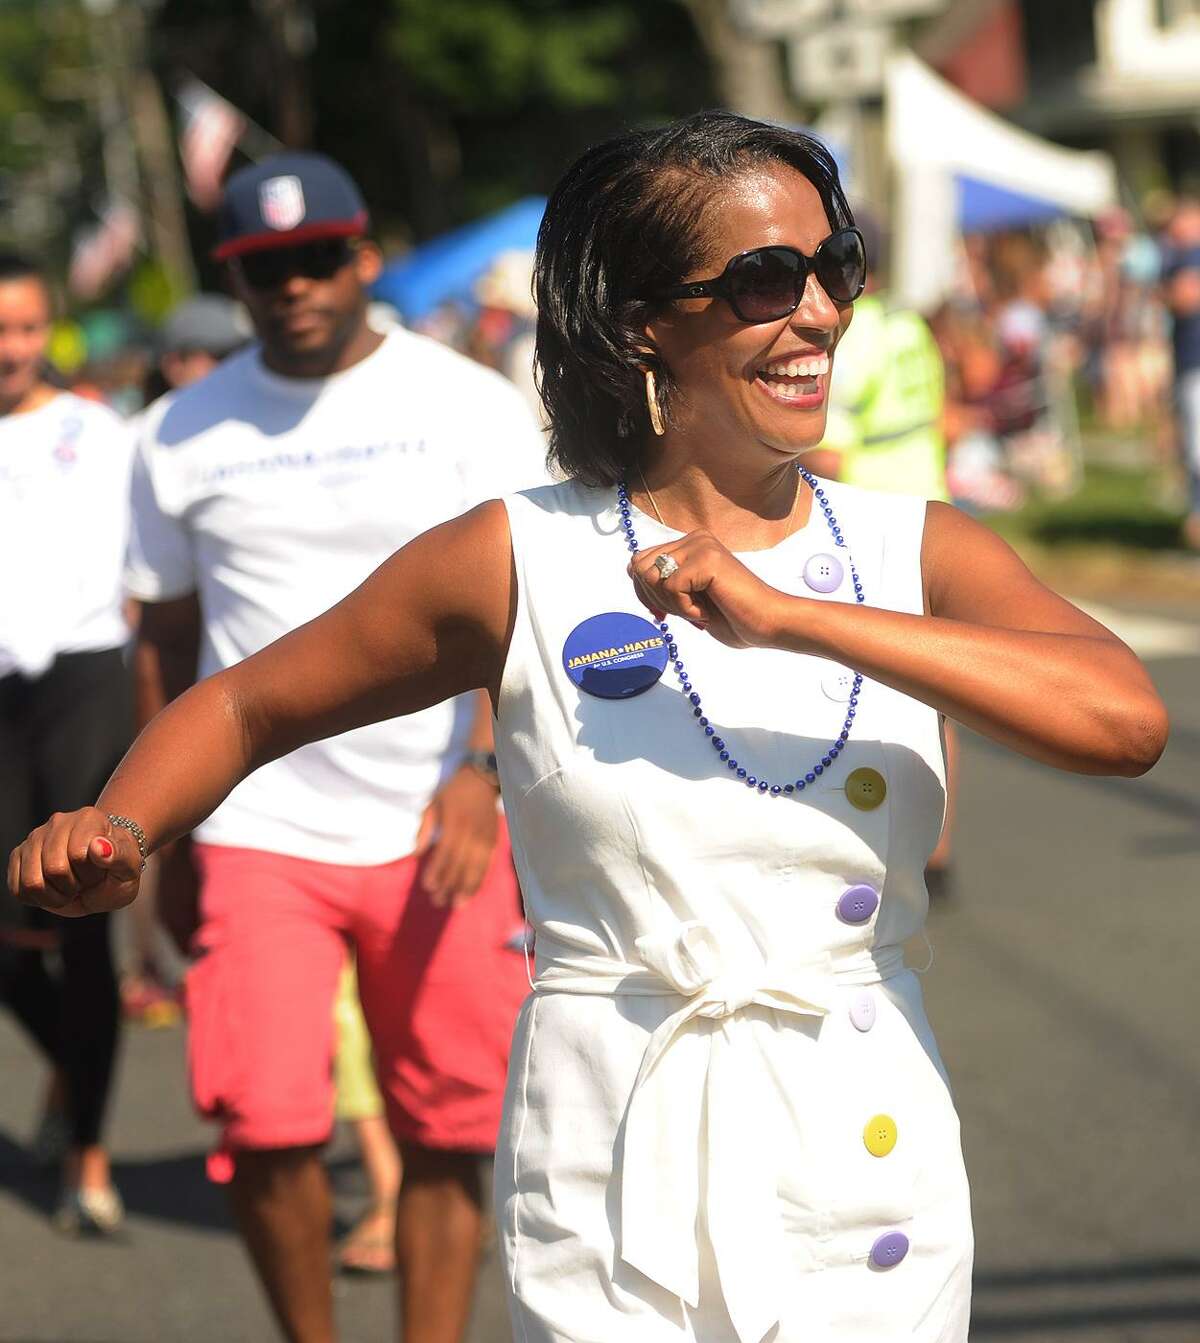 Democratic candidate for state representative Jahana Hayes marches in the annual Newtown Labor Day Parade on Main Street in Newtown on Monday.